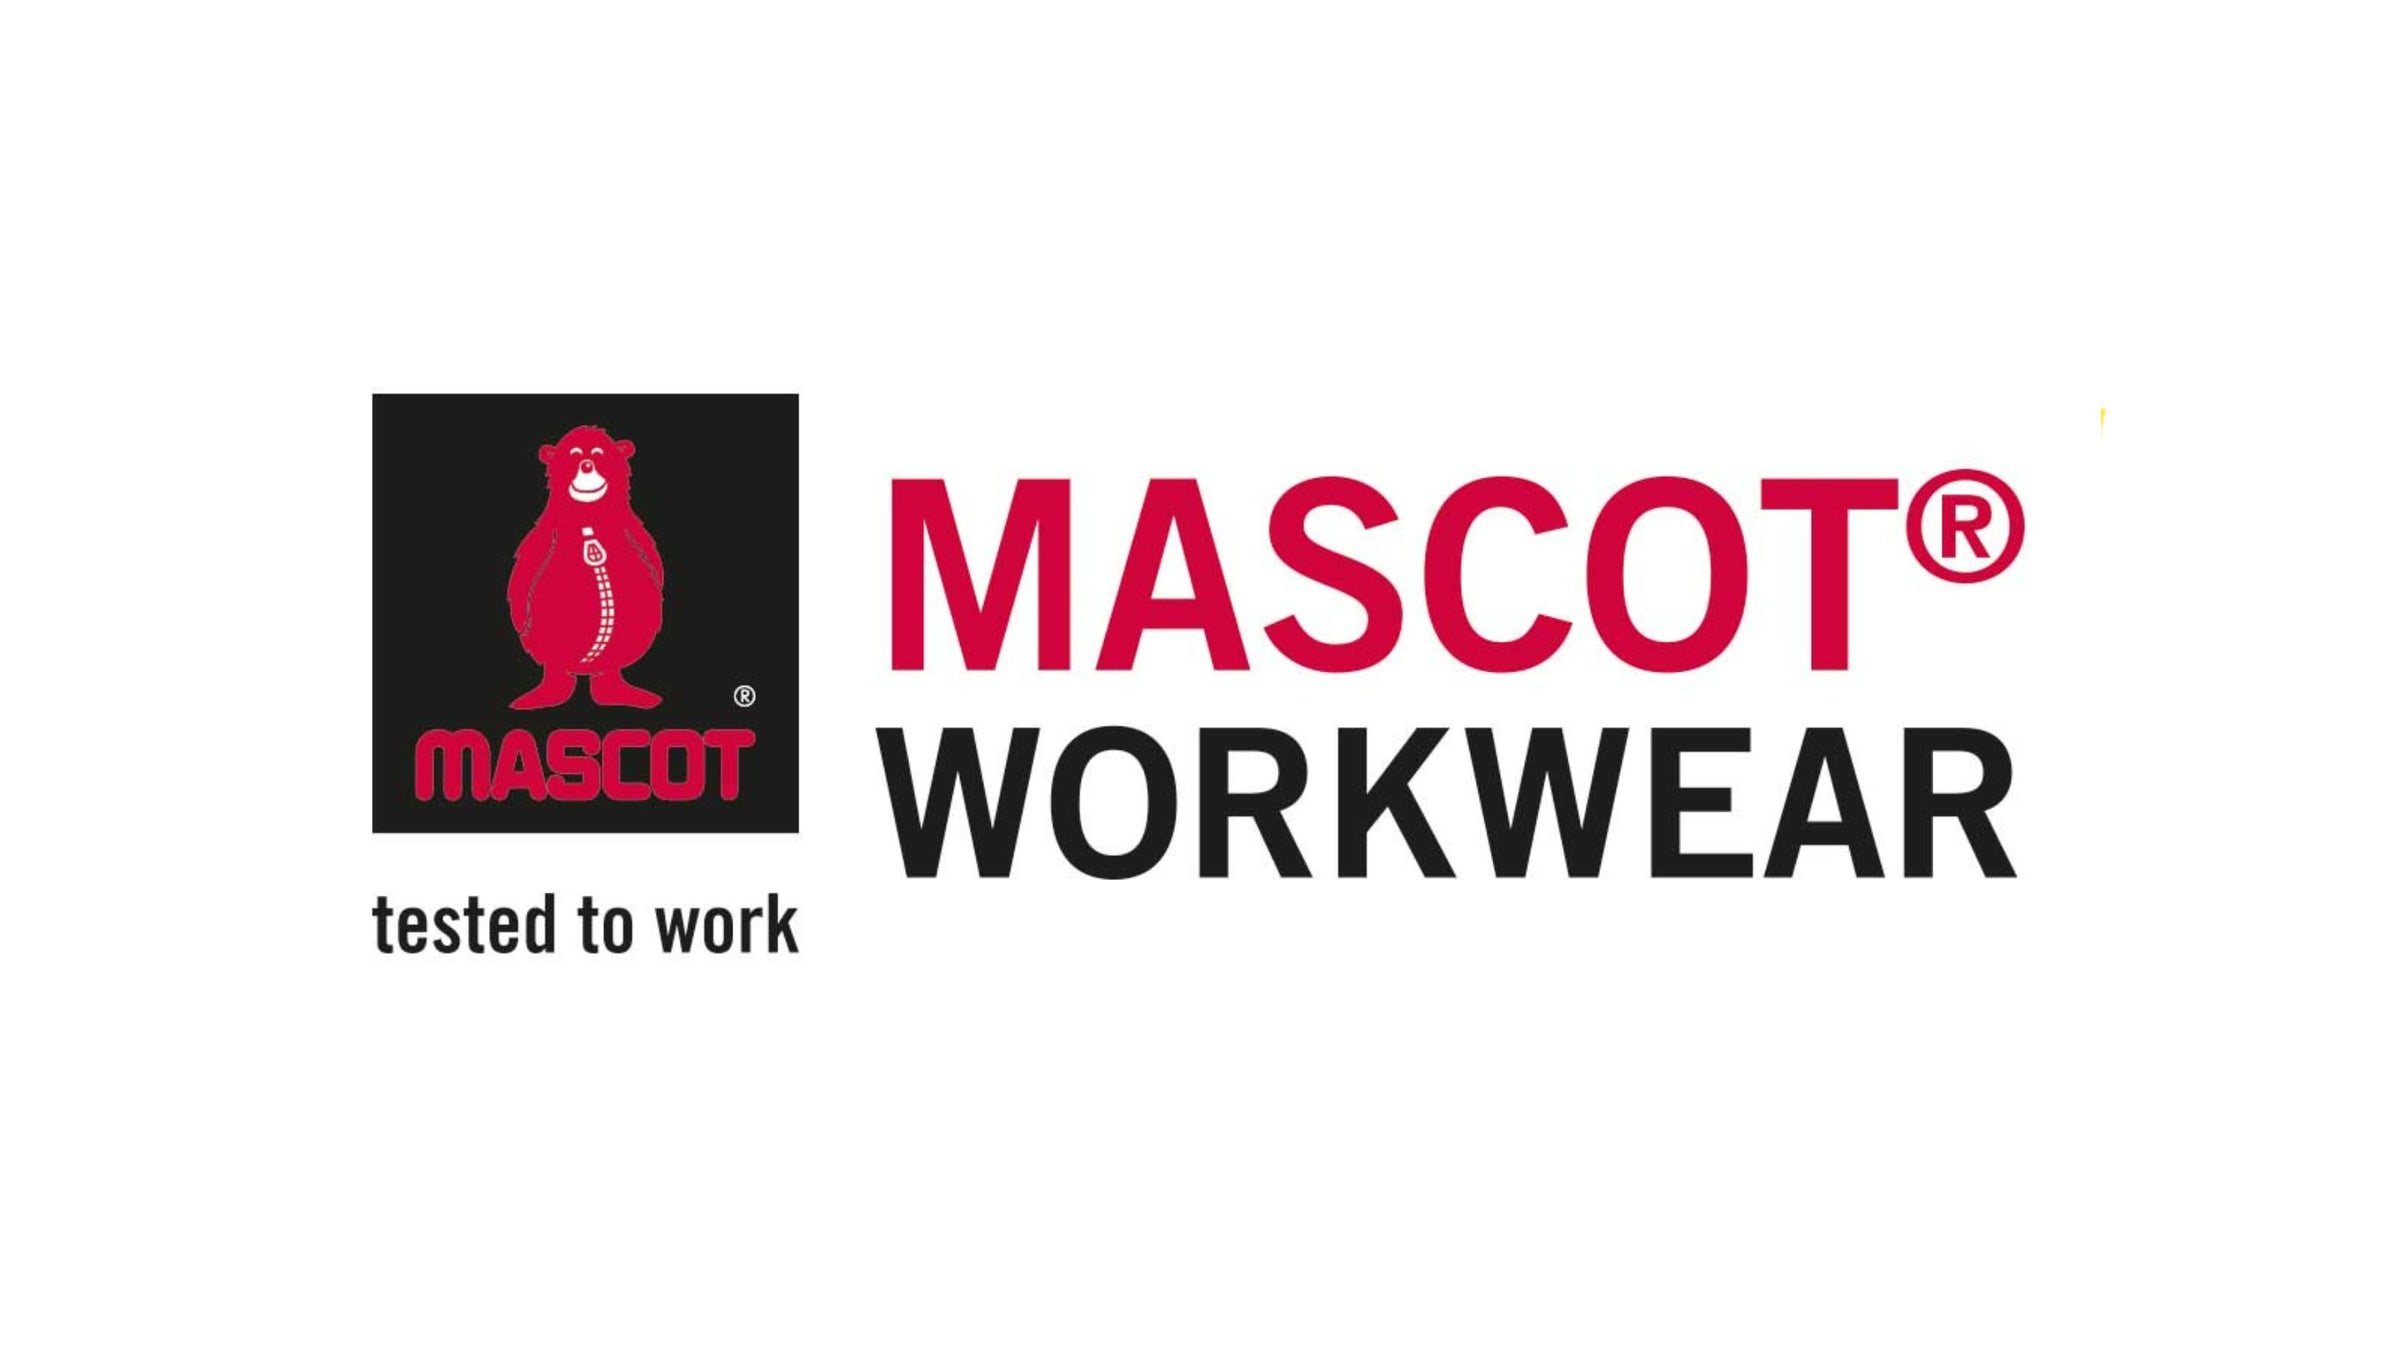 An image of the Mascot Workwear logo